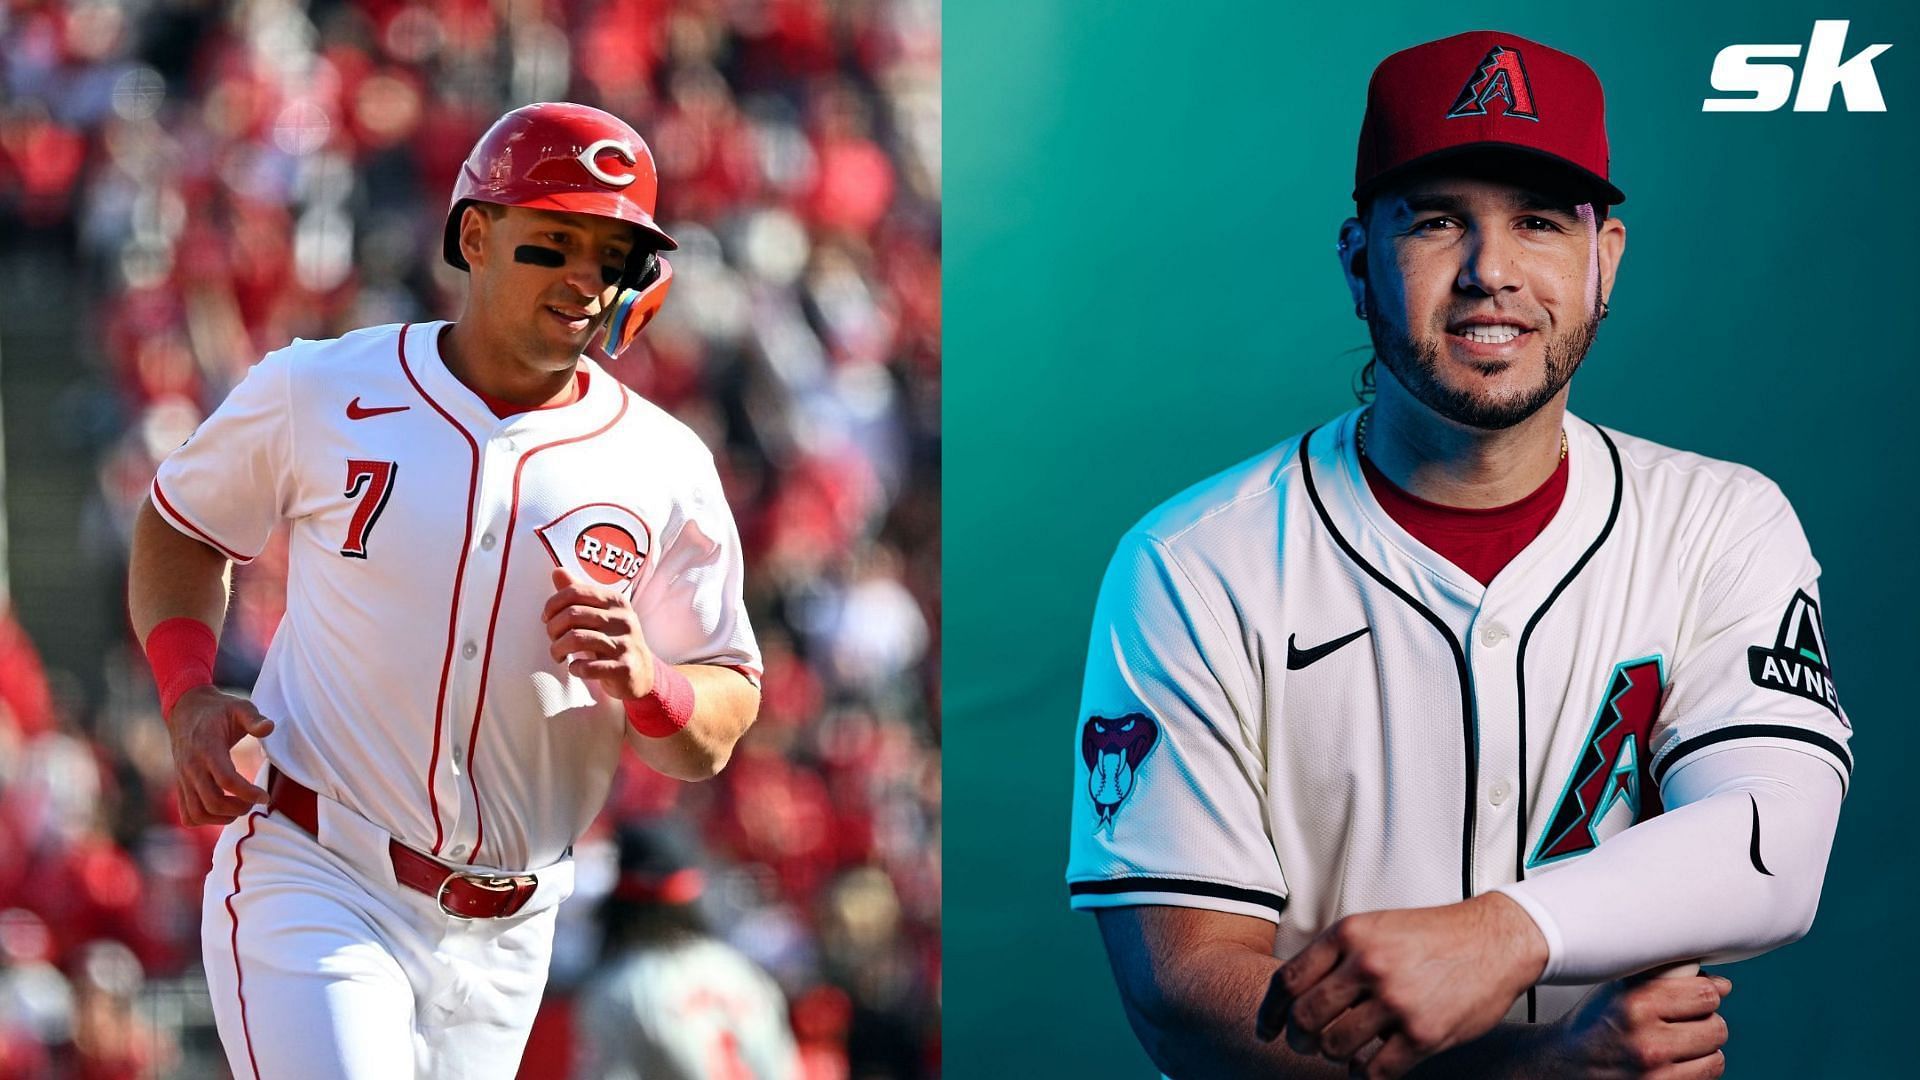 Nick Martini and Eugenio Suarez could be top fantasy baseball adds for week 2, Patrick Sandoval could be dropped